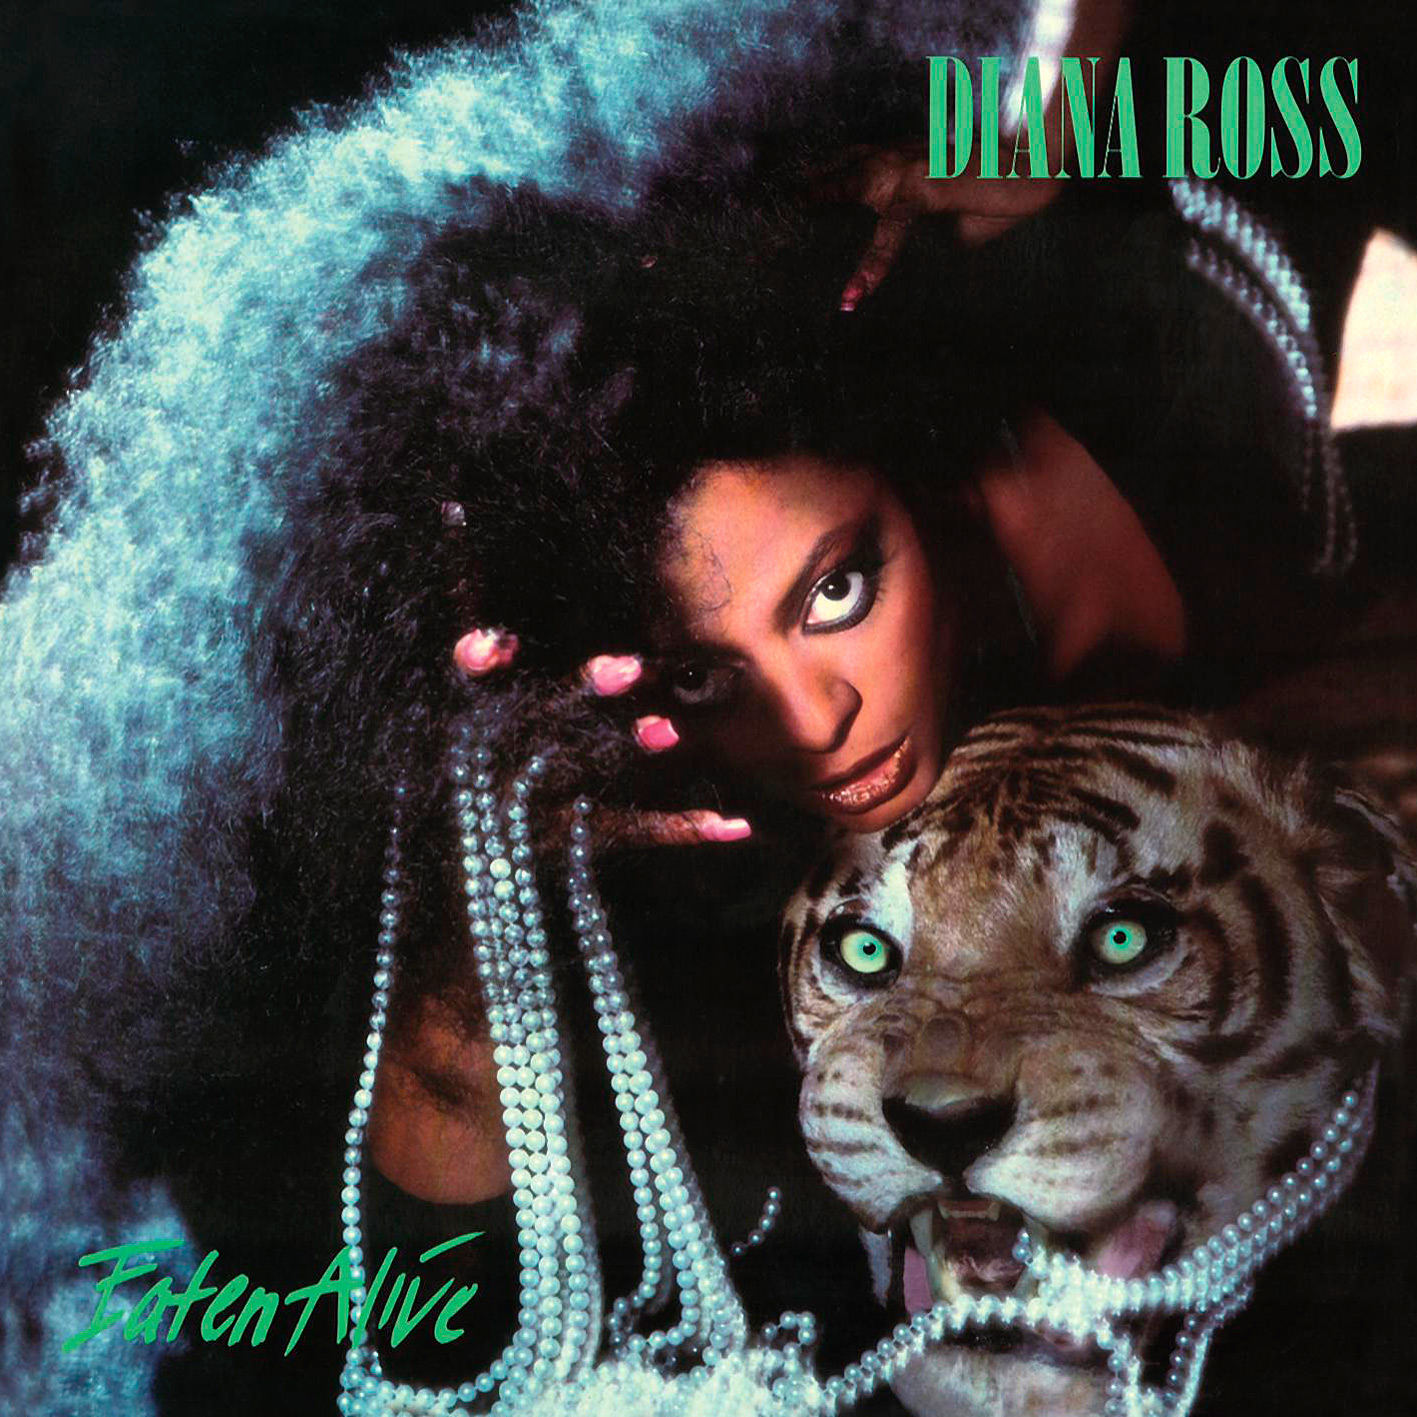 Diana Ross - Eaten Alive {Expanded Edition} (1985/2015) [HDTracks FLAC 24bit/96kHz]